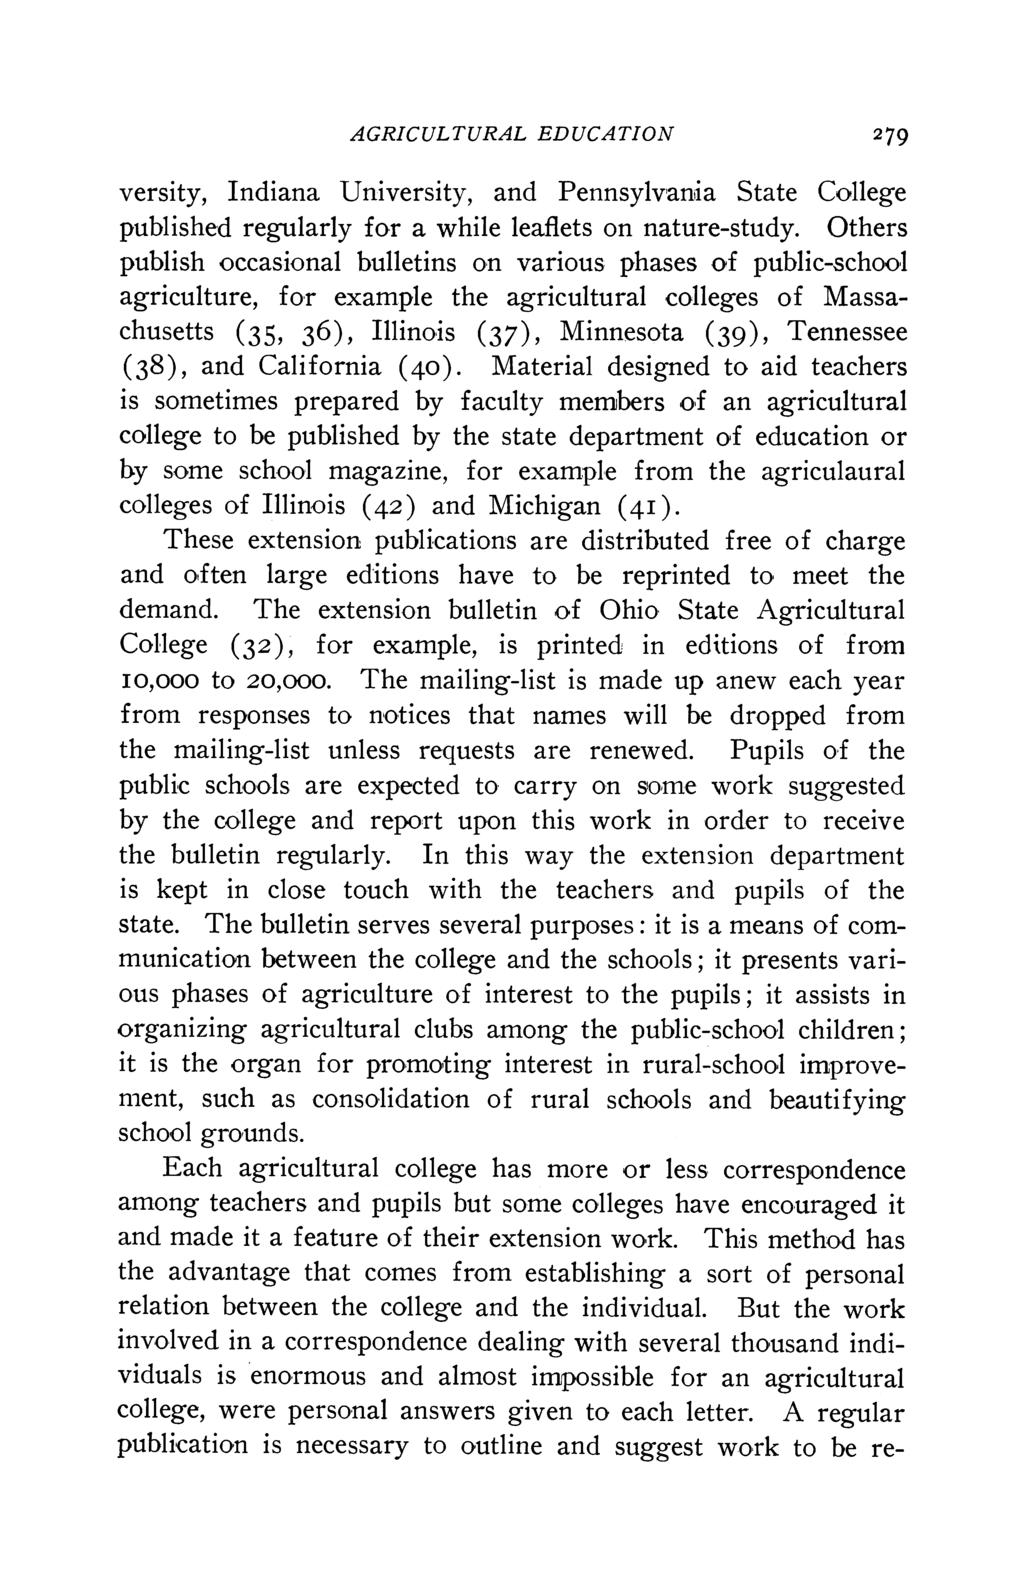 AGRICULTURAL EDUCATION 279 versity, Indiana University, and Pennsylvania State College published regularly for a while leaflets on nature-study.